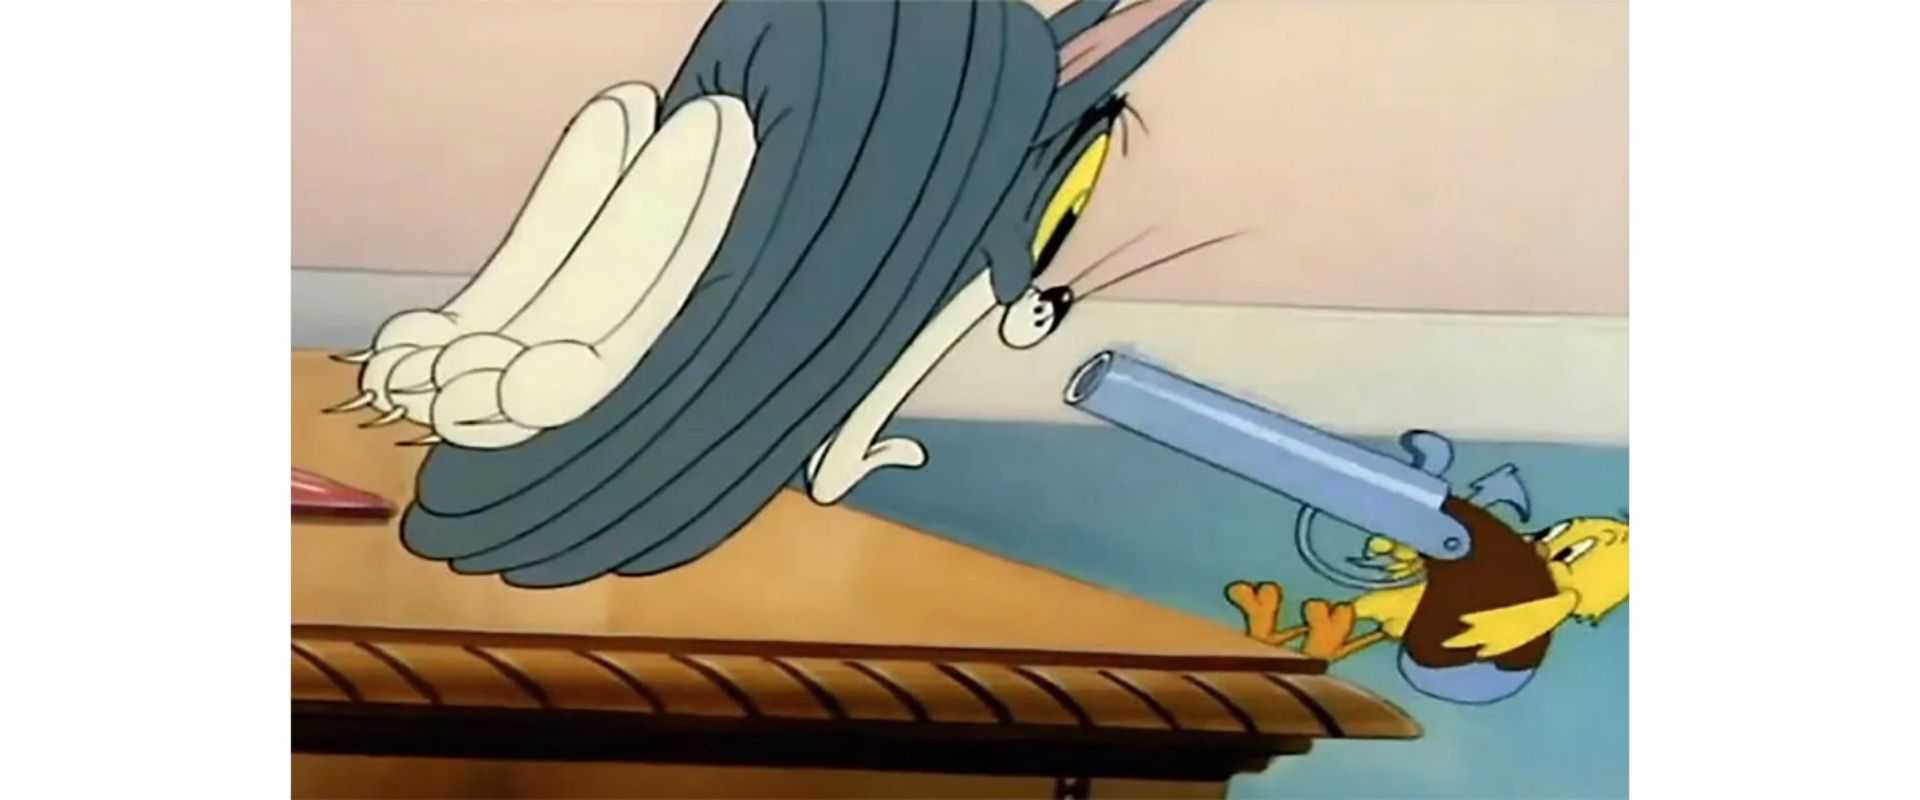 Cartoon "Tom and Jerry" - the use of animated technique Exaggeration